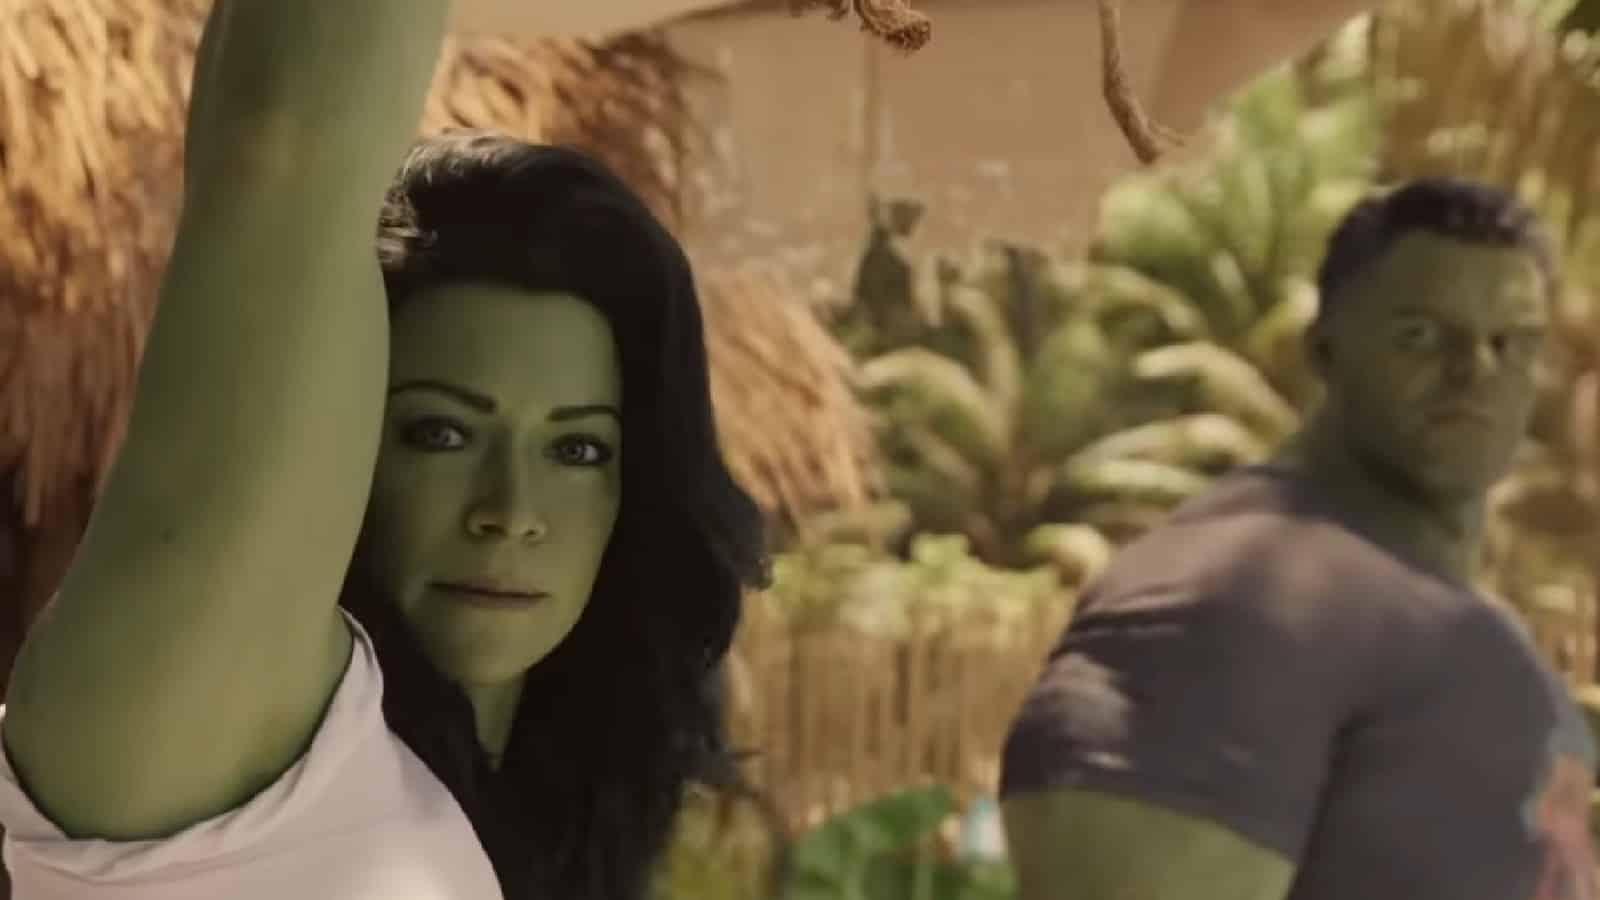 She-Hulk breaks the fourth wall in the SDCC trailer.